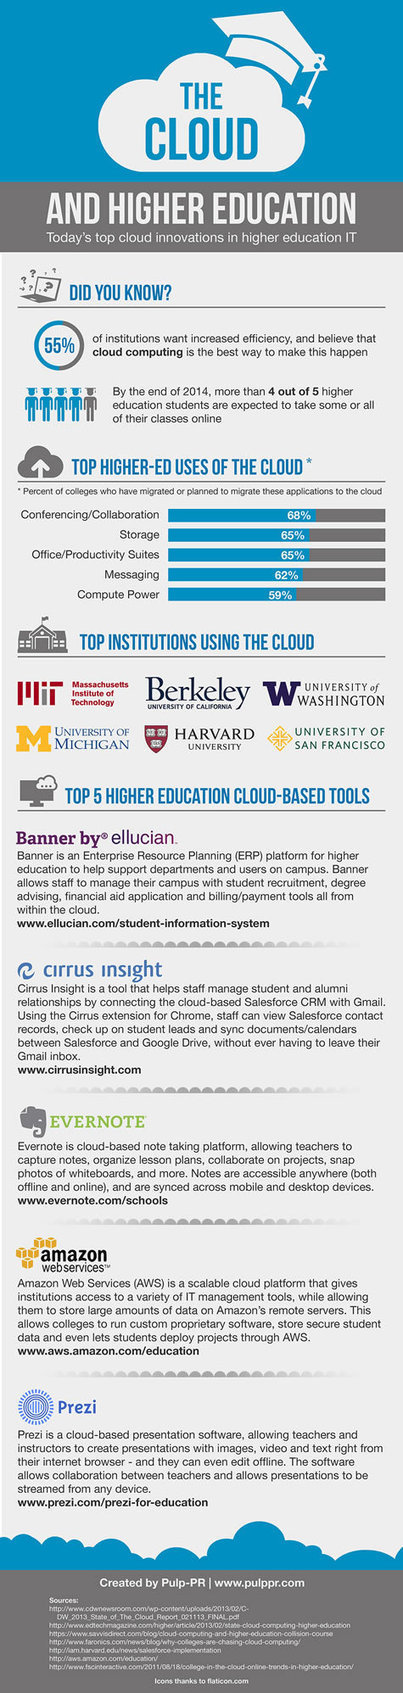 The Cloud and Higher Education: New twist for the Ivory Tower | E-Learning-Inclusivo (Mashup) | Scoop.it